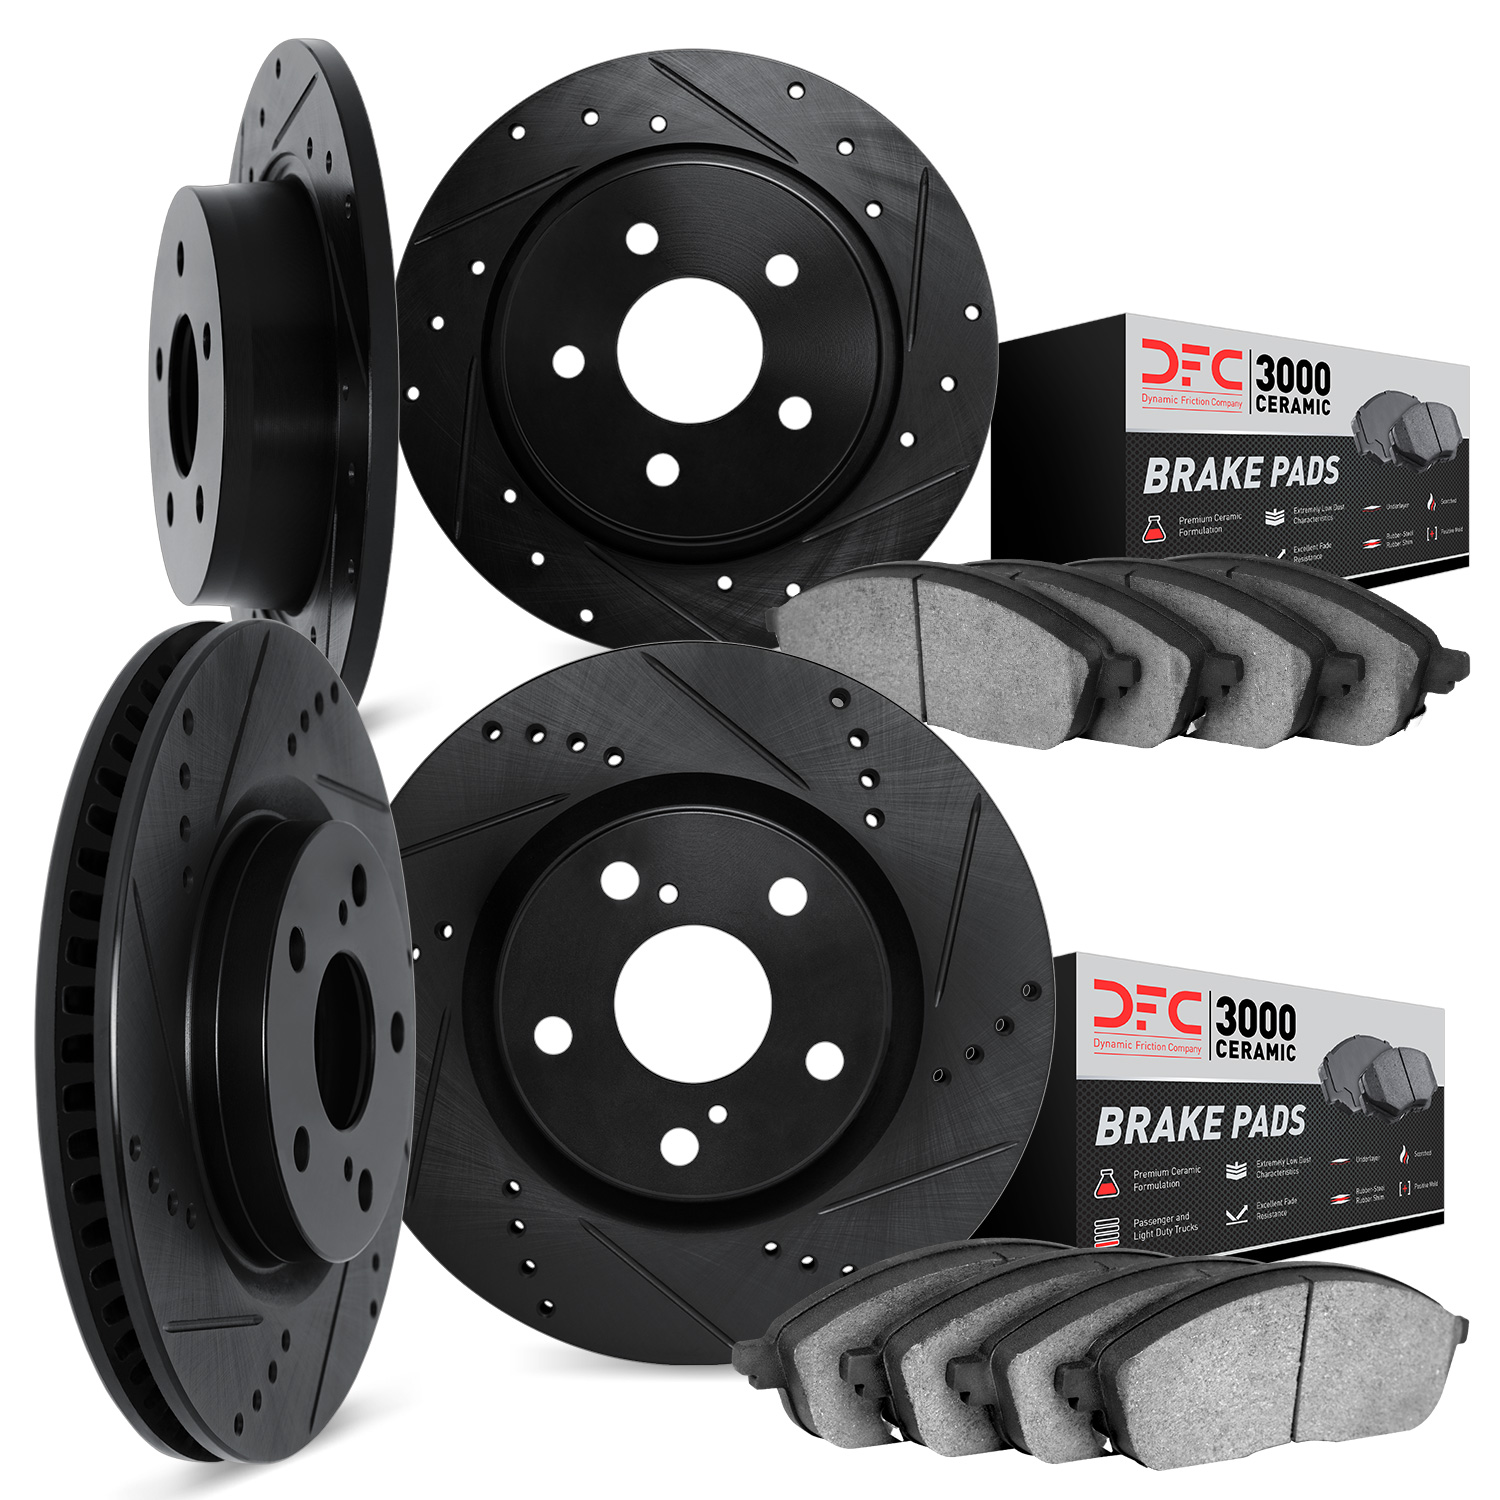 8304-58004 Drilled/Slotted Brake Rotors with 3000-Series Ceramic Brake Pads Kit [Black], 1993-1995 Acura/Honda, Position: Front